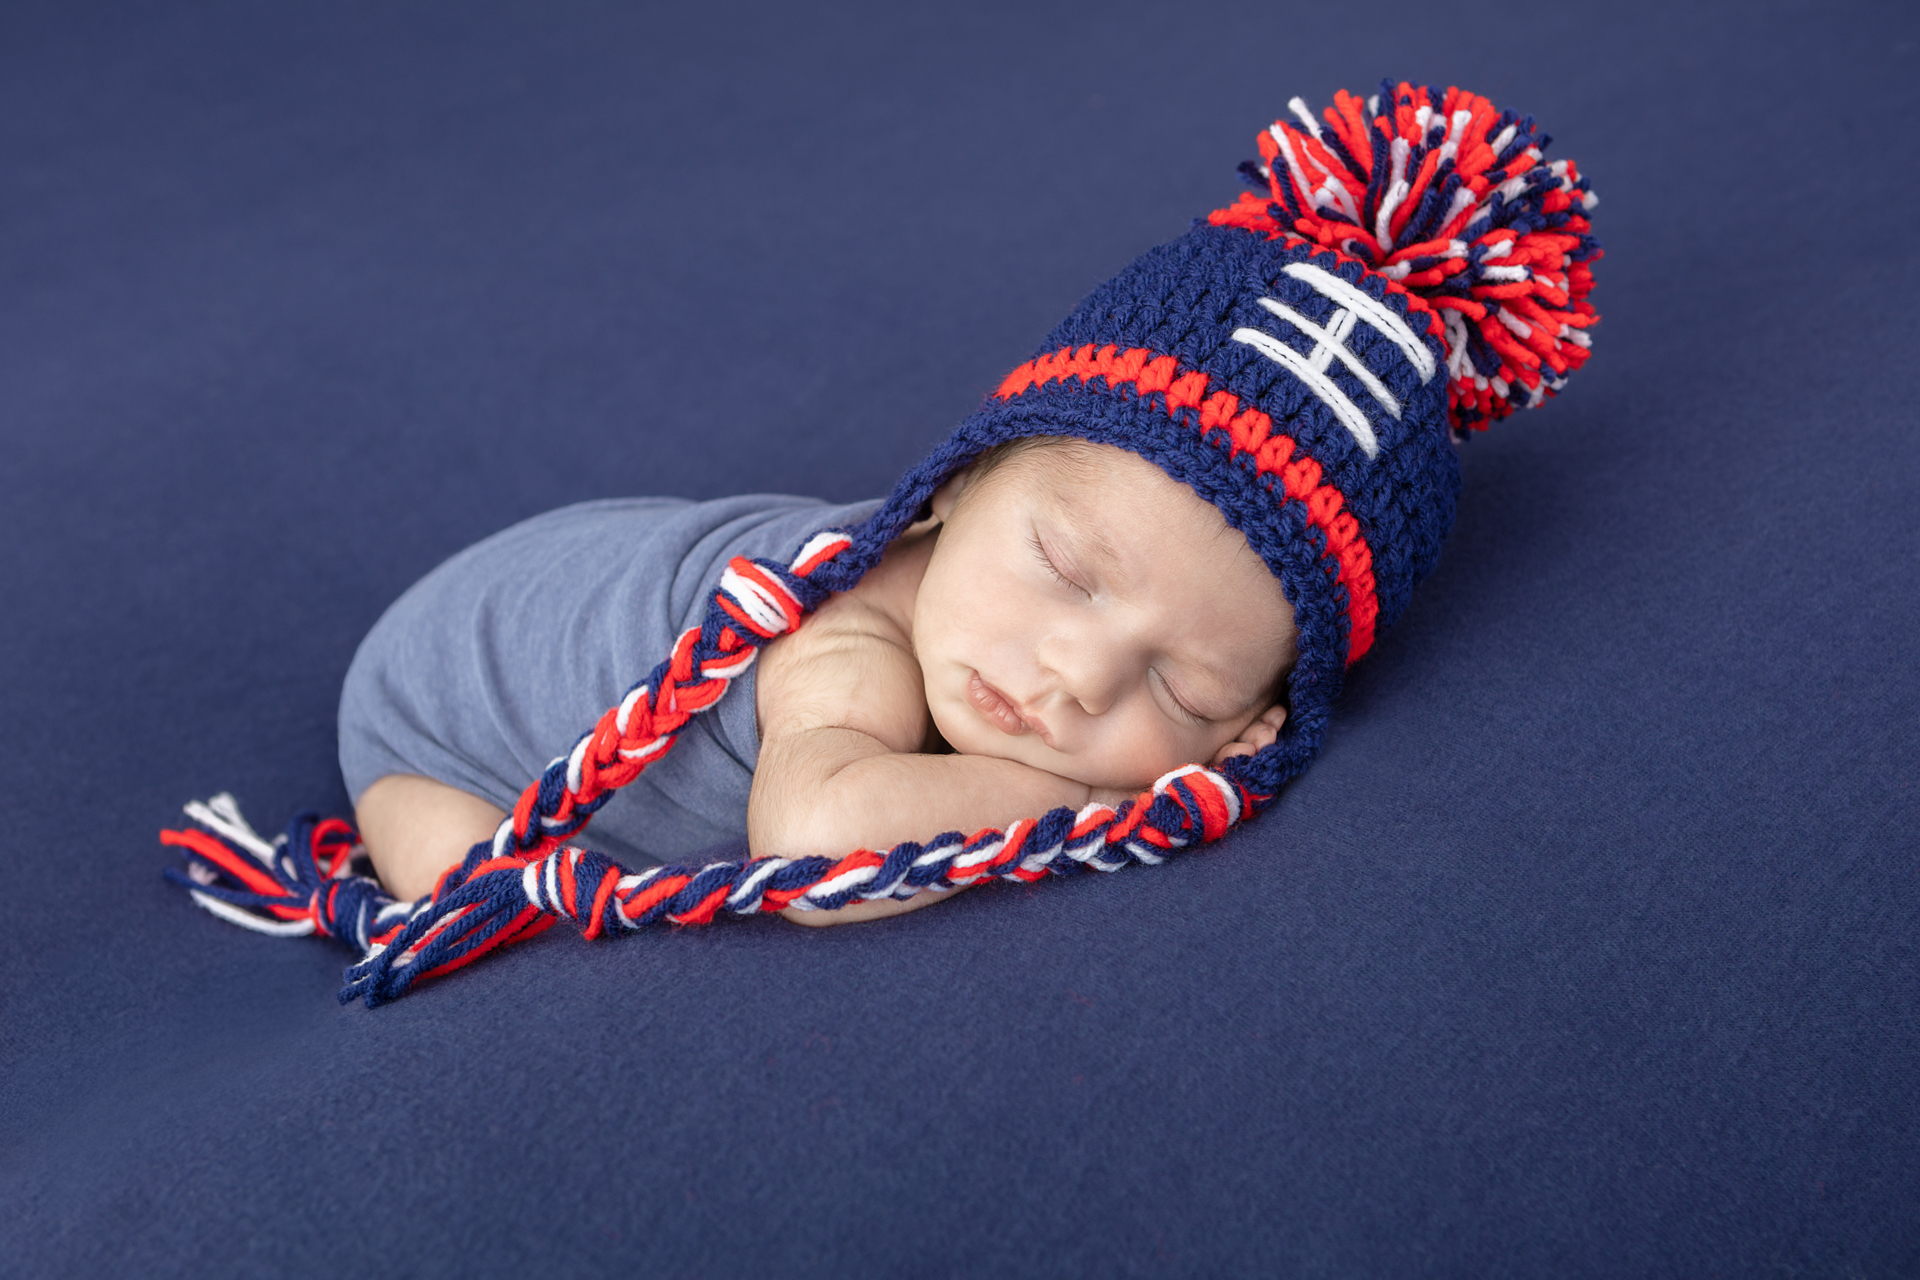 New England Patriots inspired newborn photo; sleeping baby boy wearing a Patriots red, white, blue stocking cap